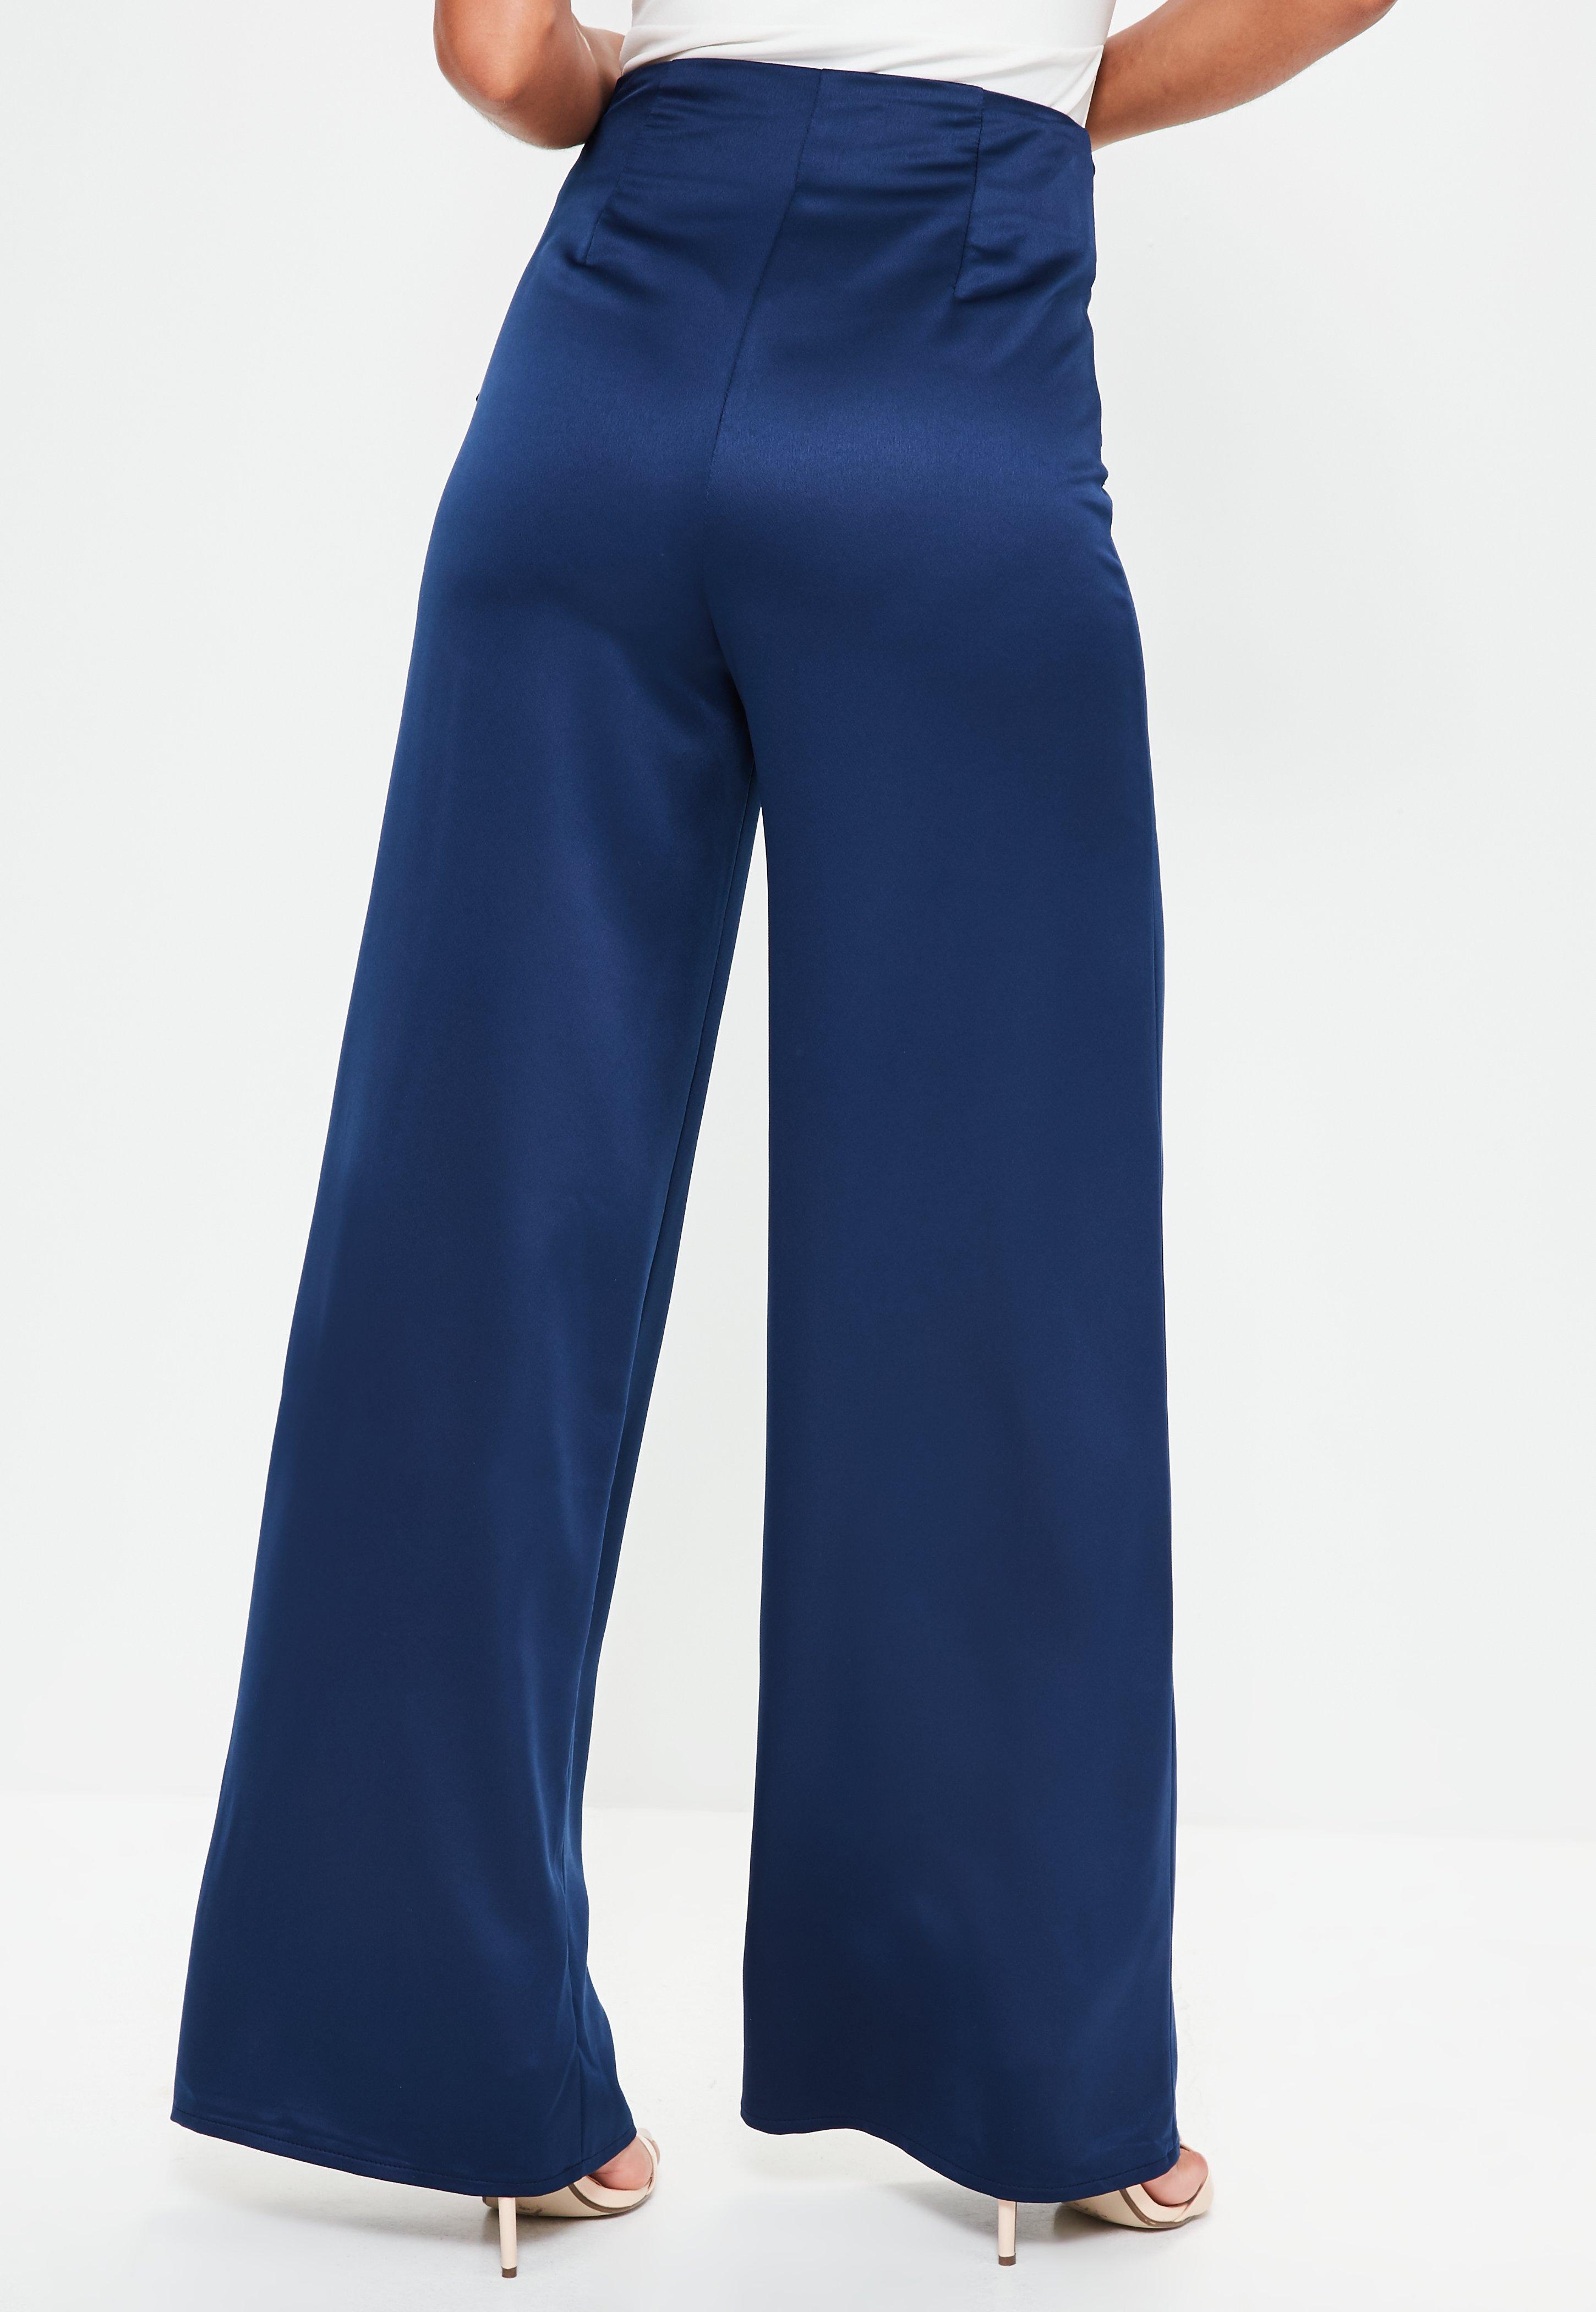 Lyst - Missguided Navy Knot Detail Satin Wide Leg Pants in Blue